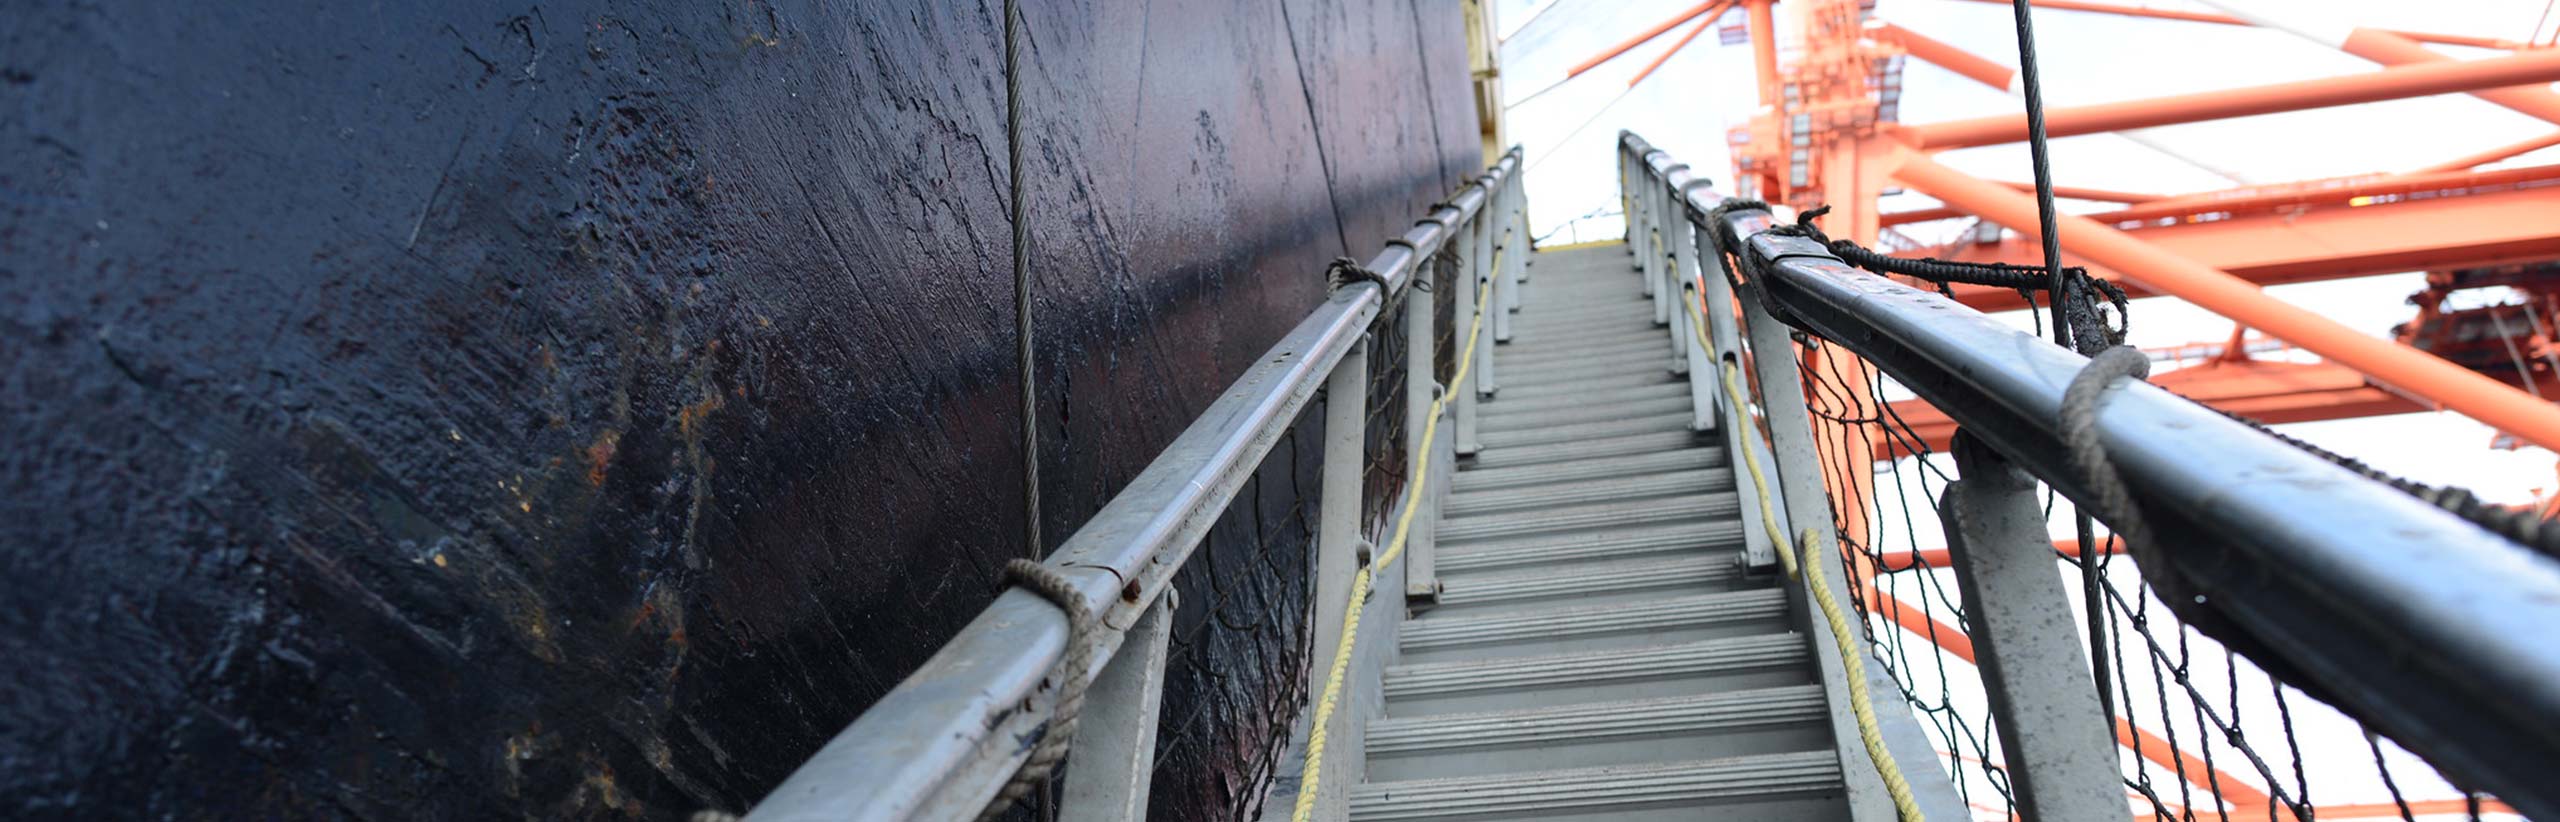 Gangway-ACCOMMODATION-LADDER-MARITIME-SAFETY-NAUTICAL-INSTITUTE-SHIP-VISITING